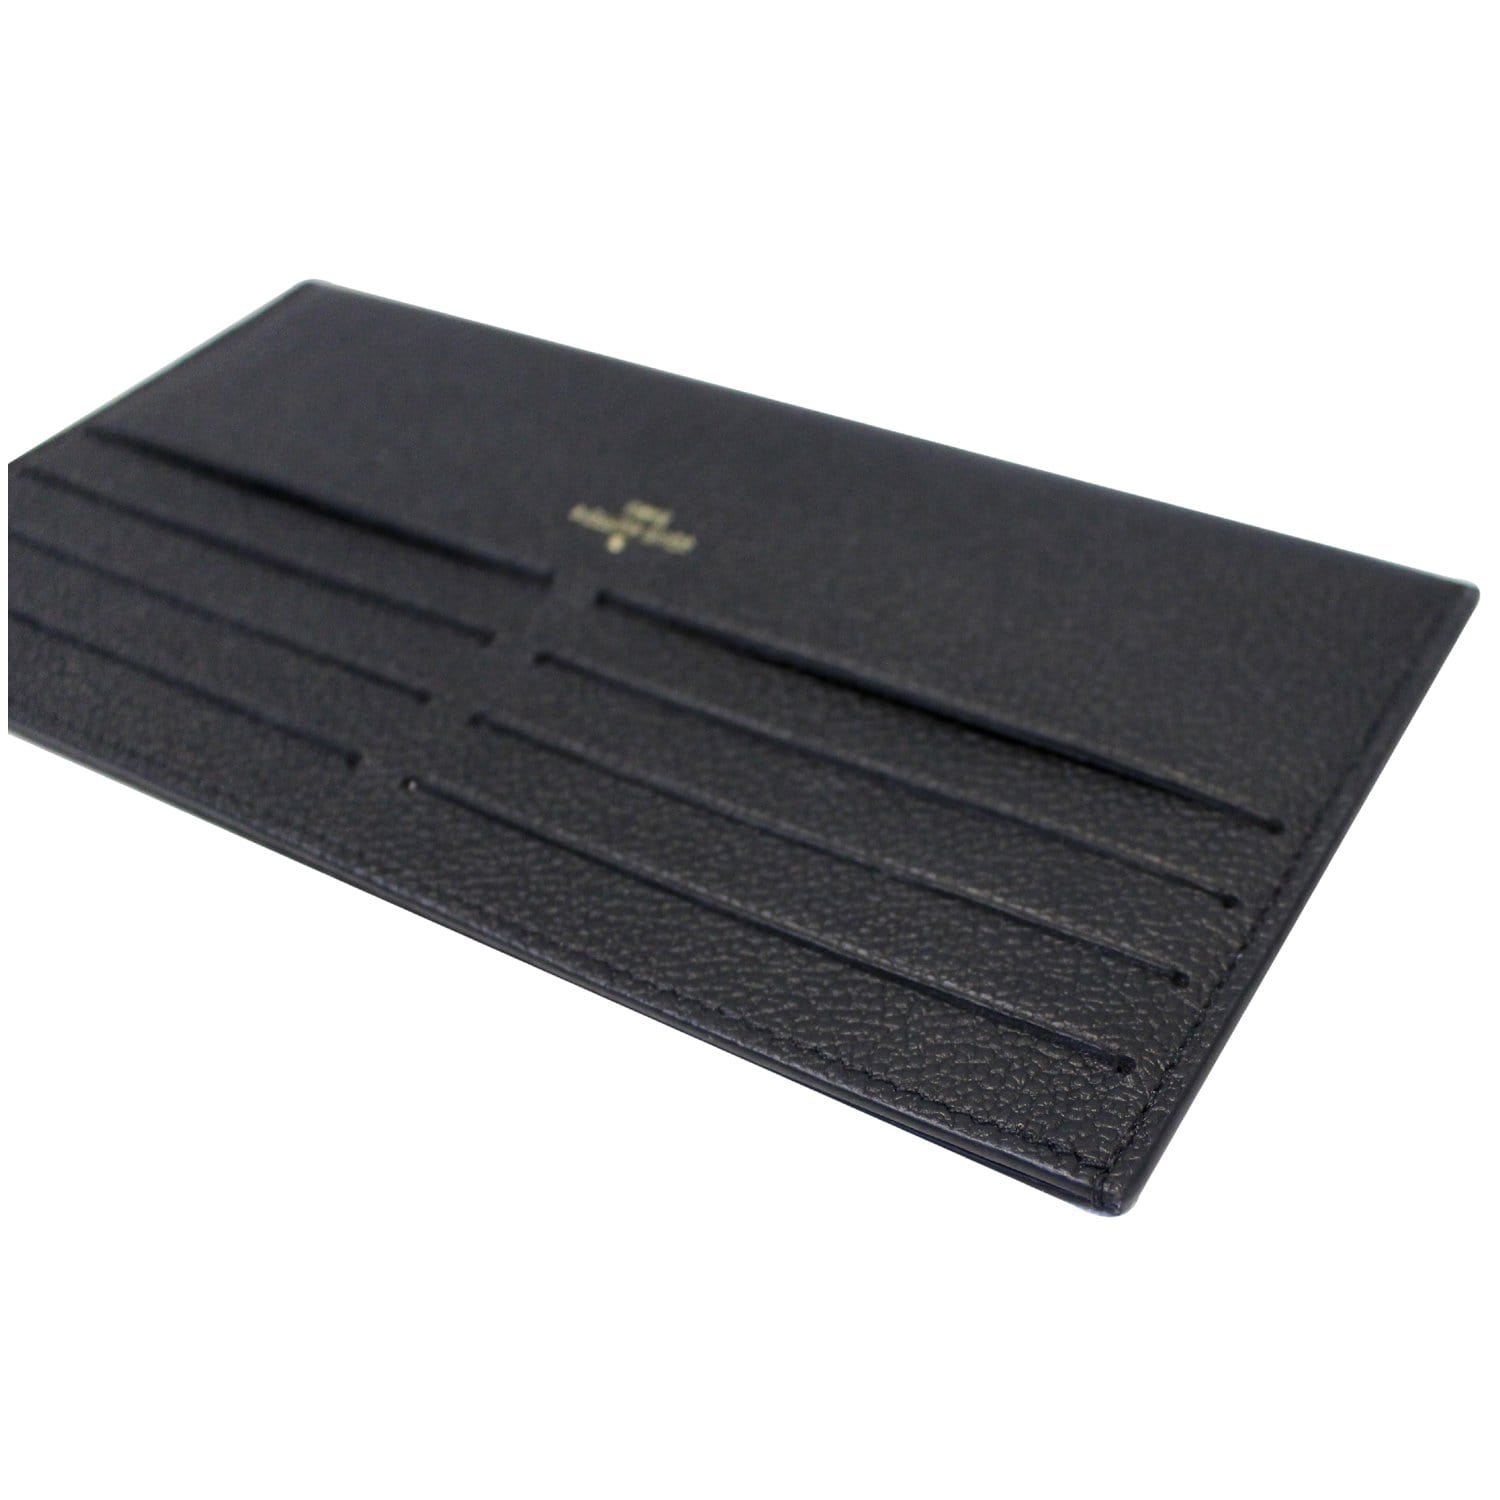 New Louis Vuitton Navy Felicie Leather Zipped Card Holder Insert